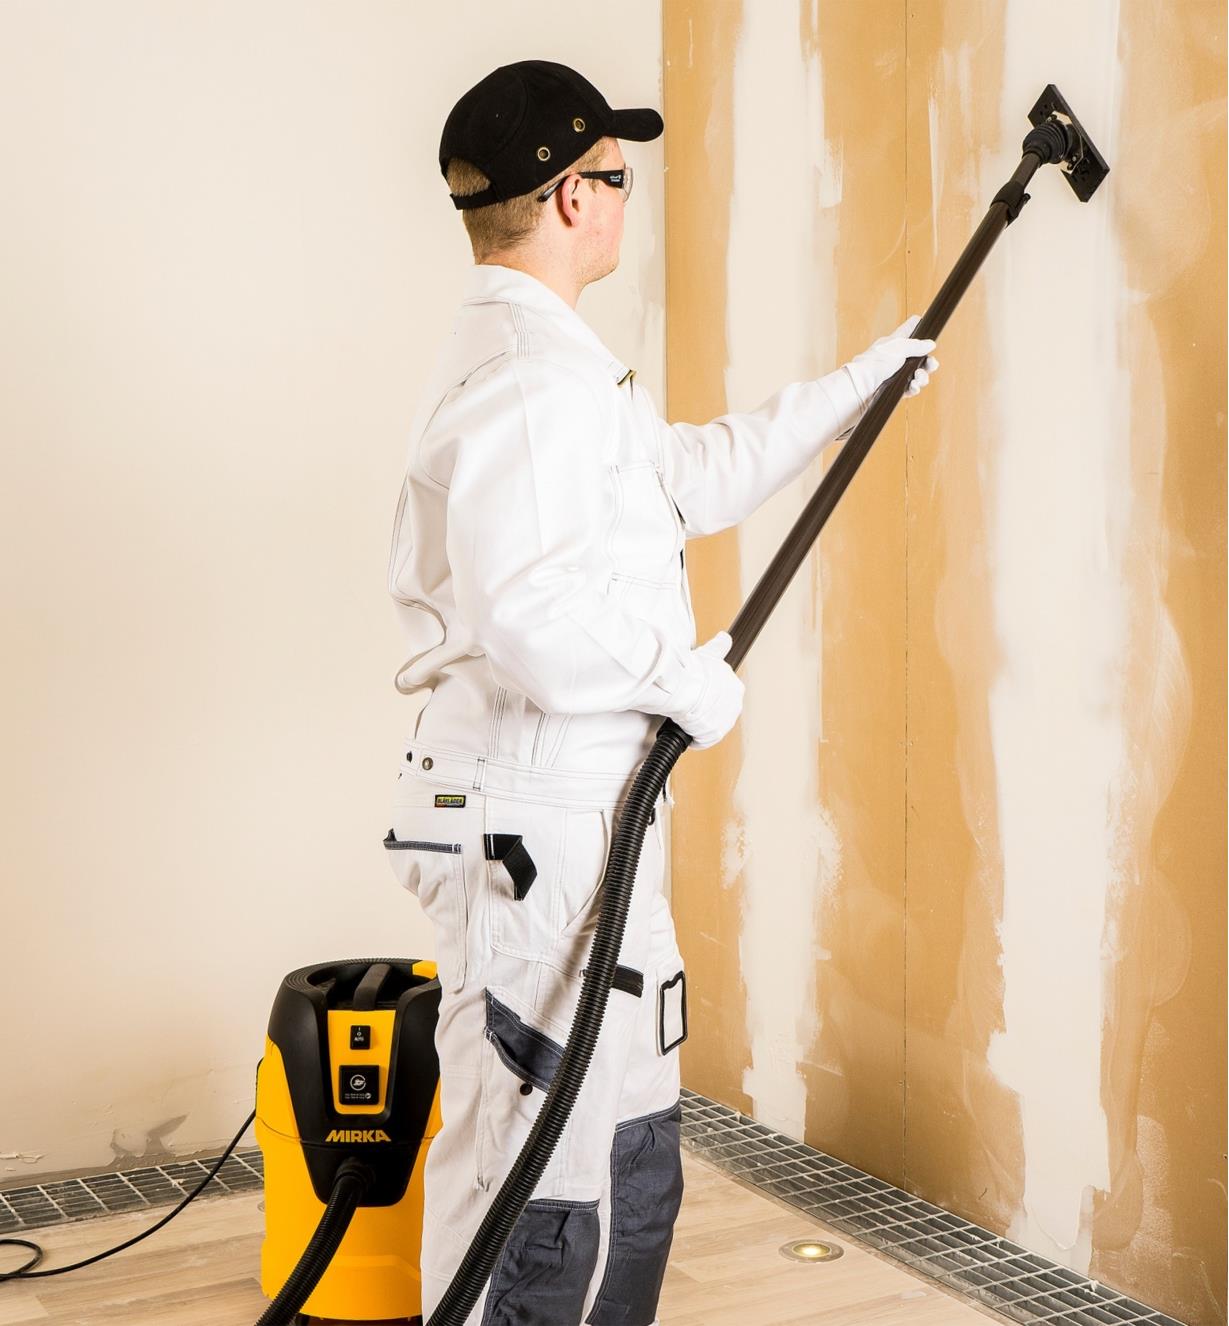 Using a Mirka DECO sander connected to a Mirka dust extractor to sand drywall